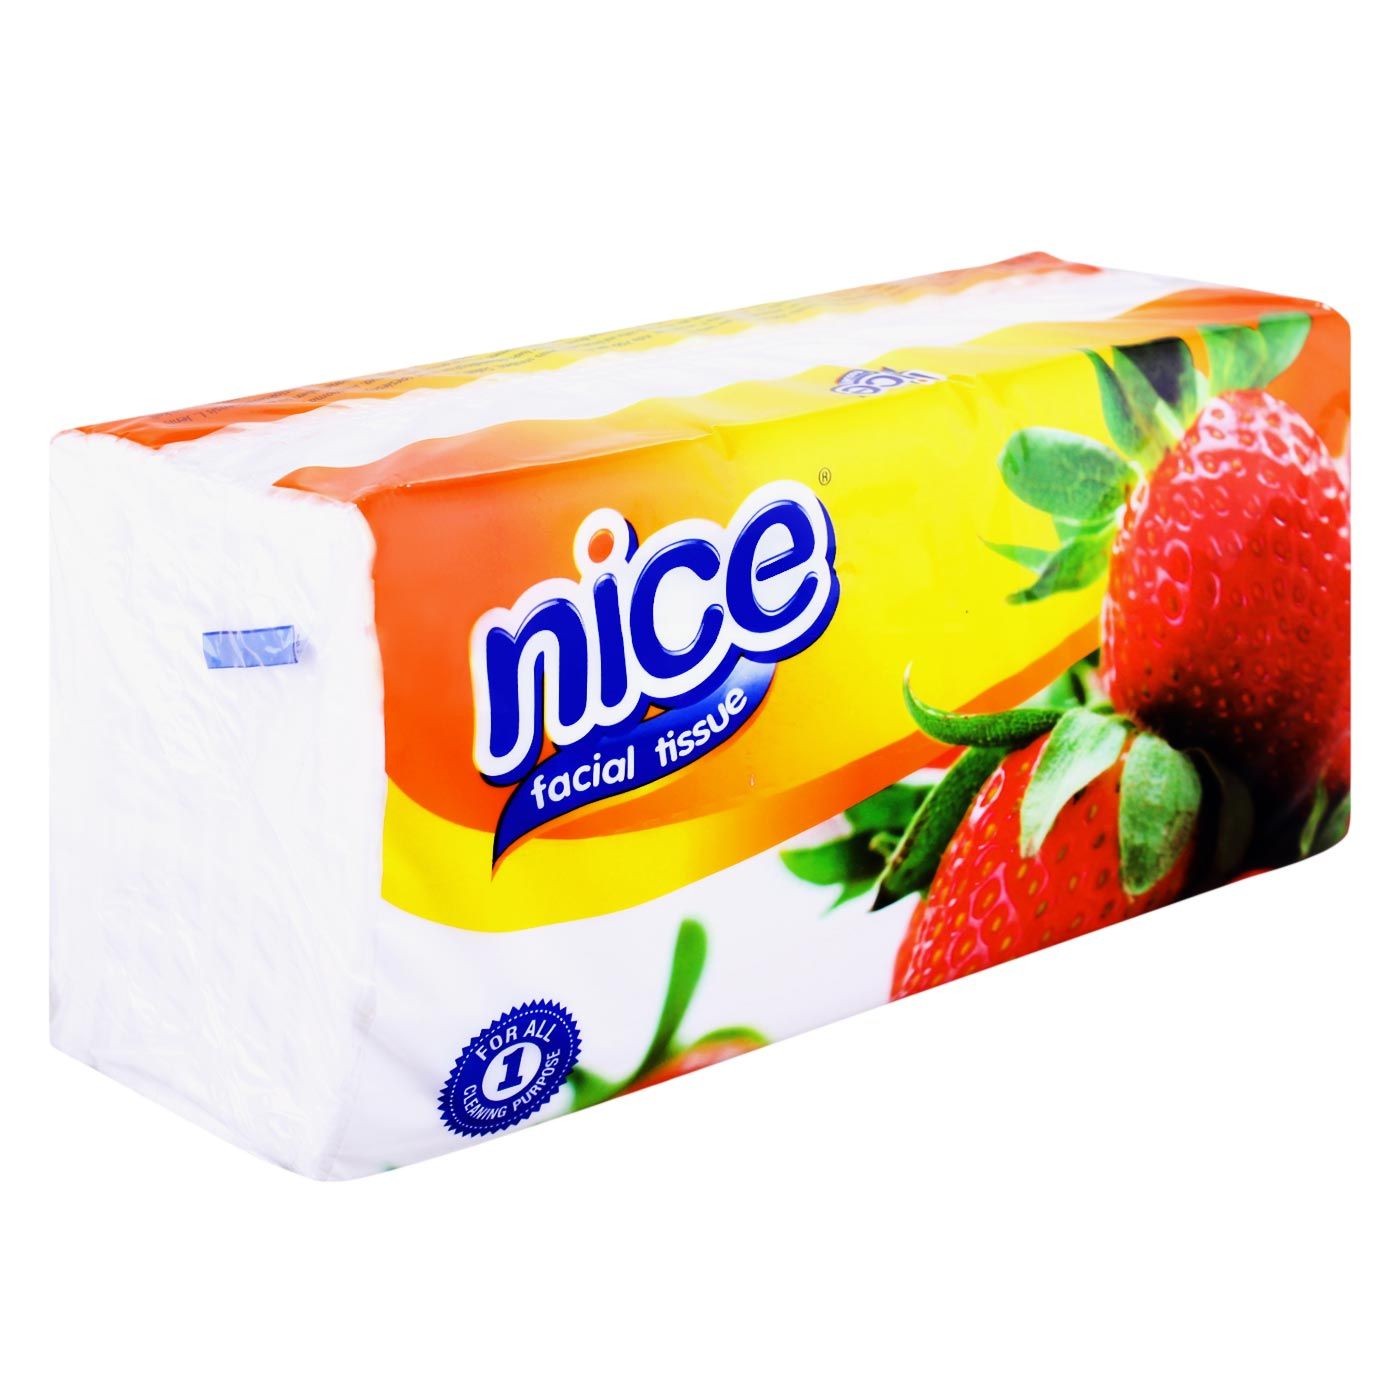 Nice Facial Soft Pack 200's (Buy 1 get 1 Free) - 2